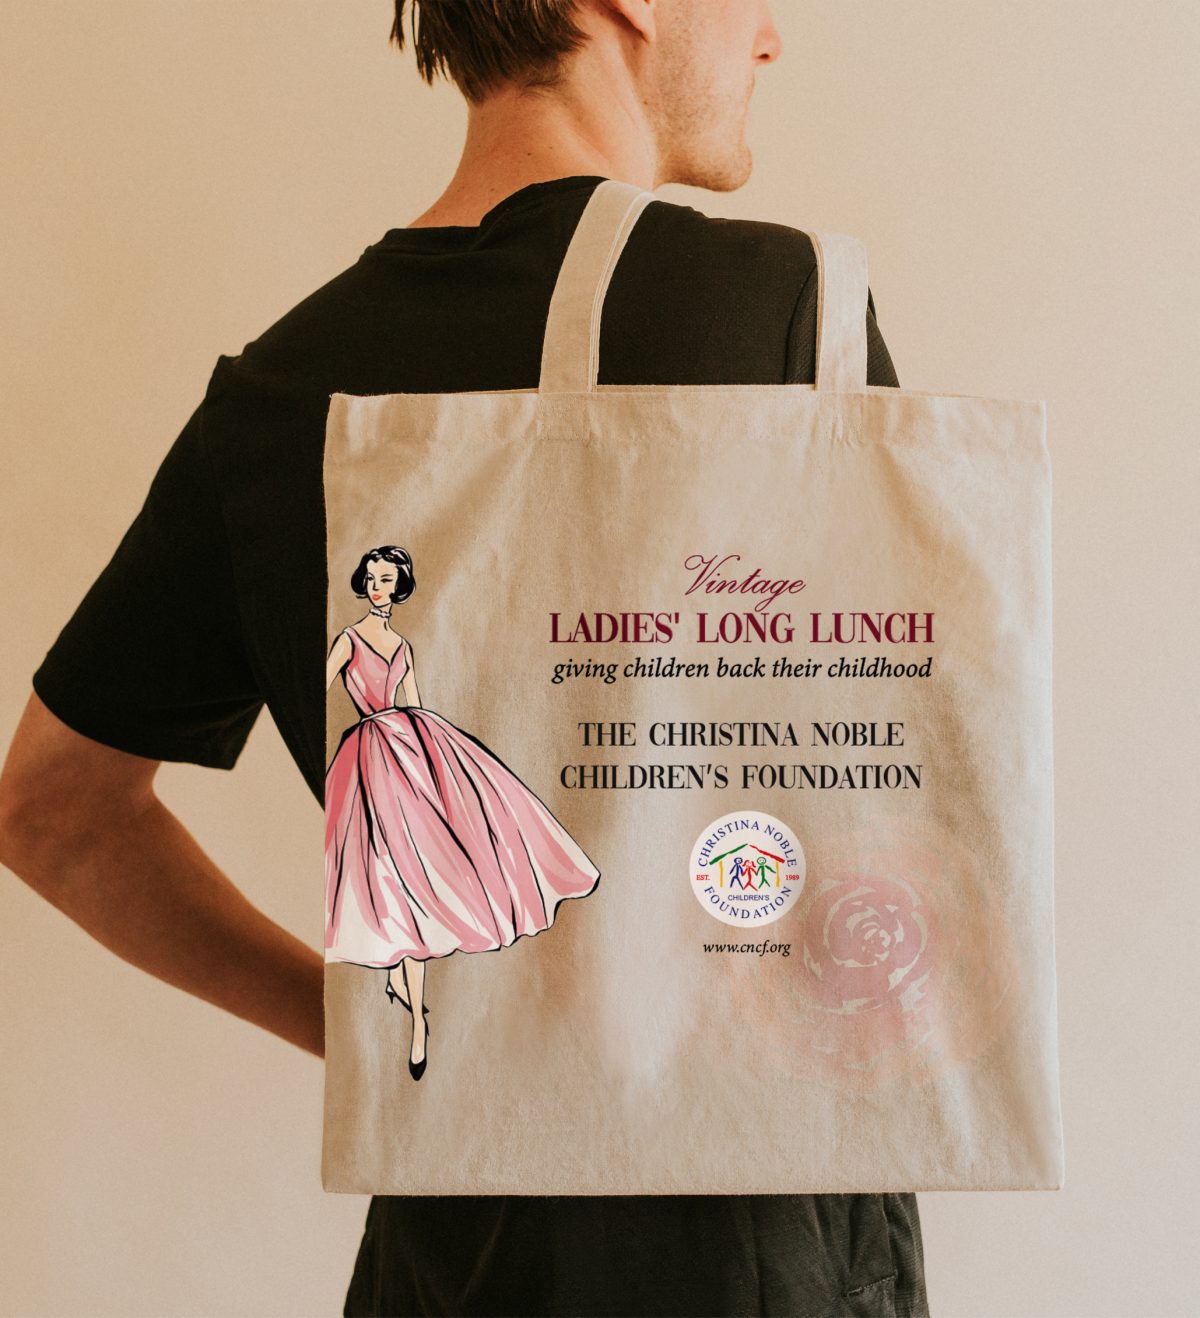 Canvas tote bag with vintage ladies' lunch event branding for Christina Noble Children's Foundation.